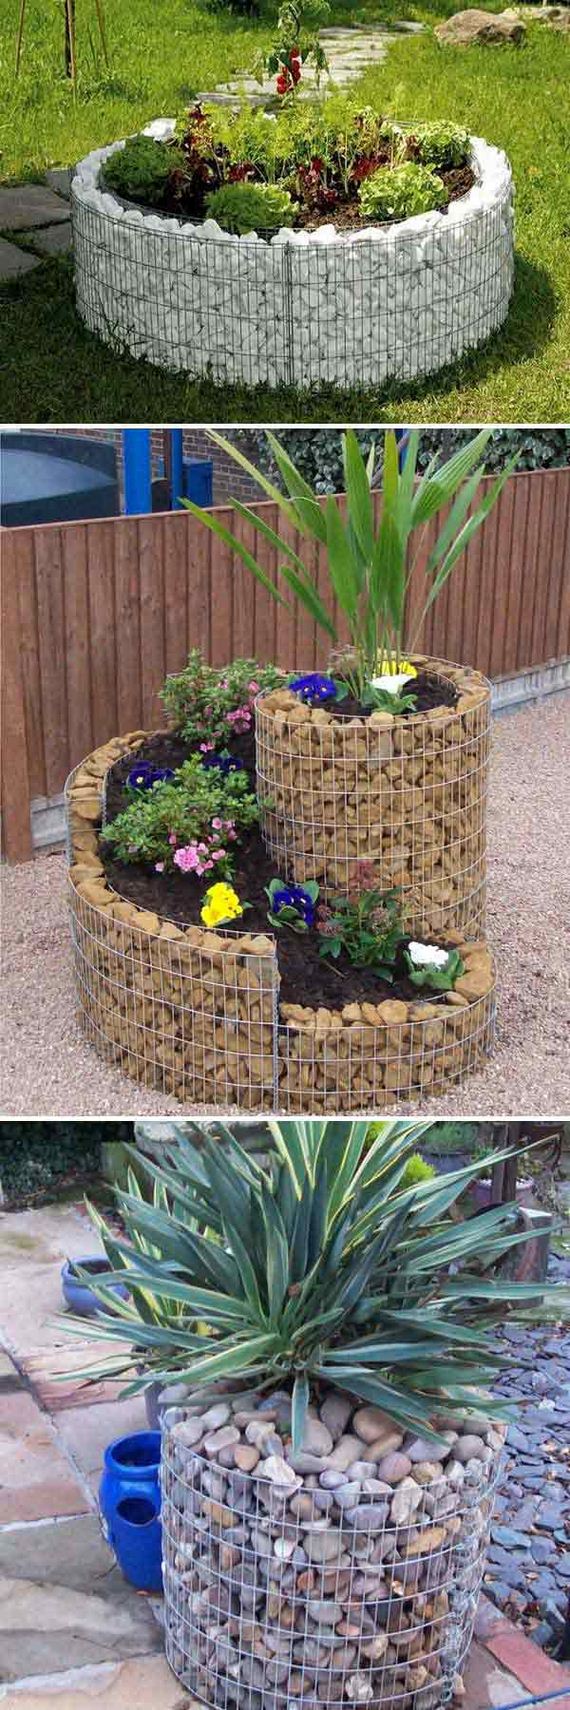 09-use-gabions-on-outdoor-projects